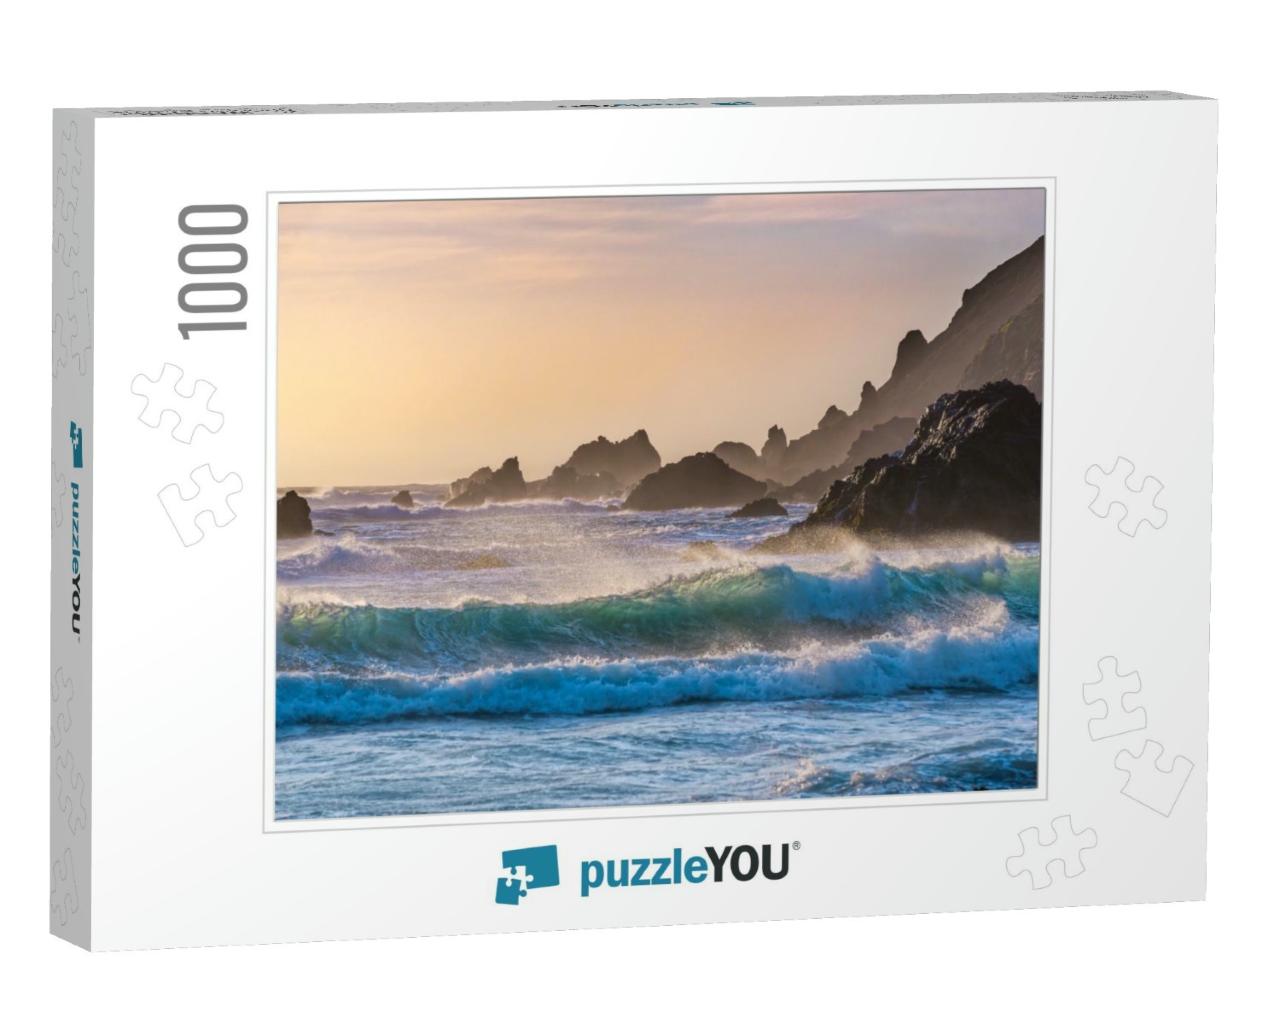 Breakers Roll in At Sunset on Pfeiffer Beach in Big Sur... Jigsaw Puzzle with 1000 pieces